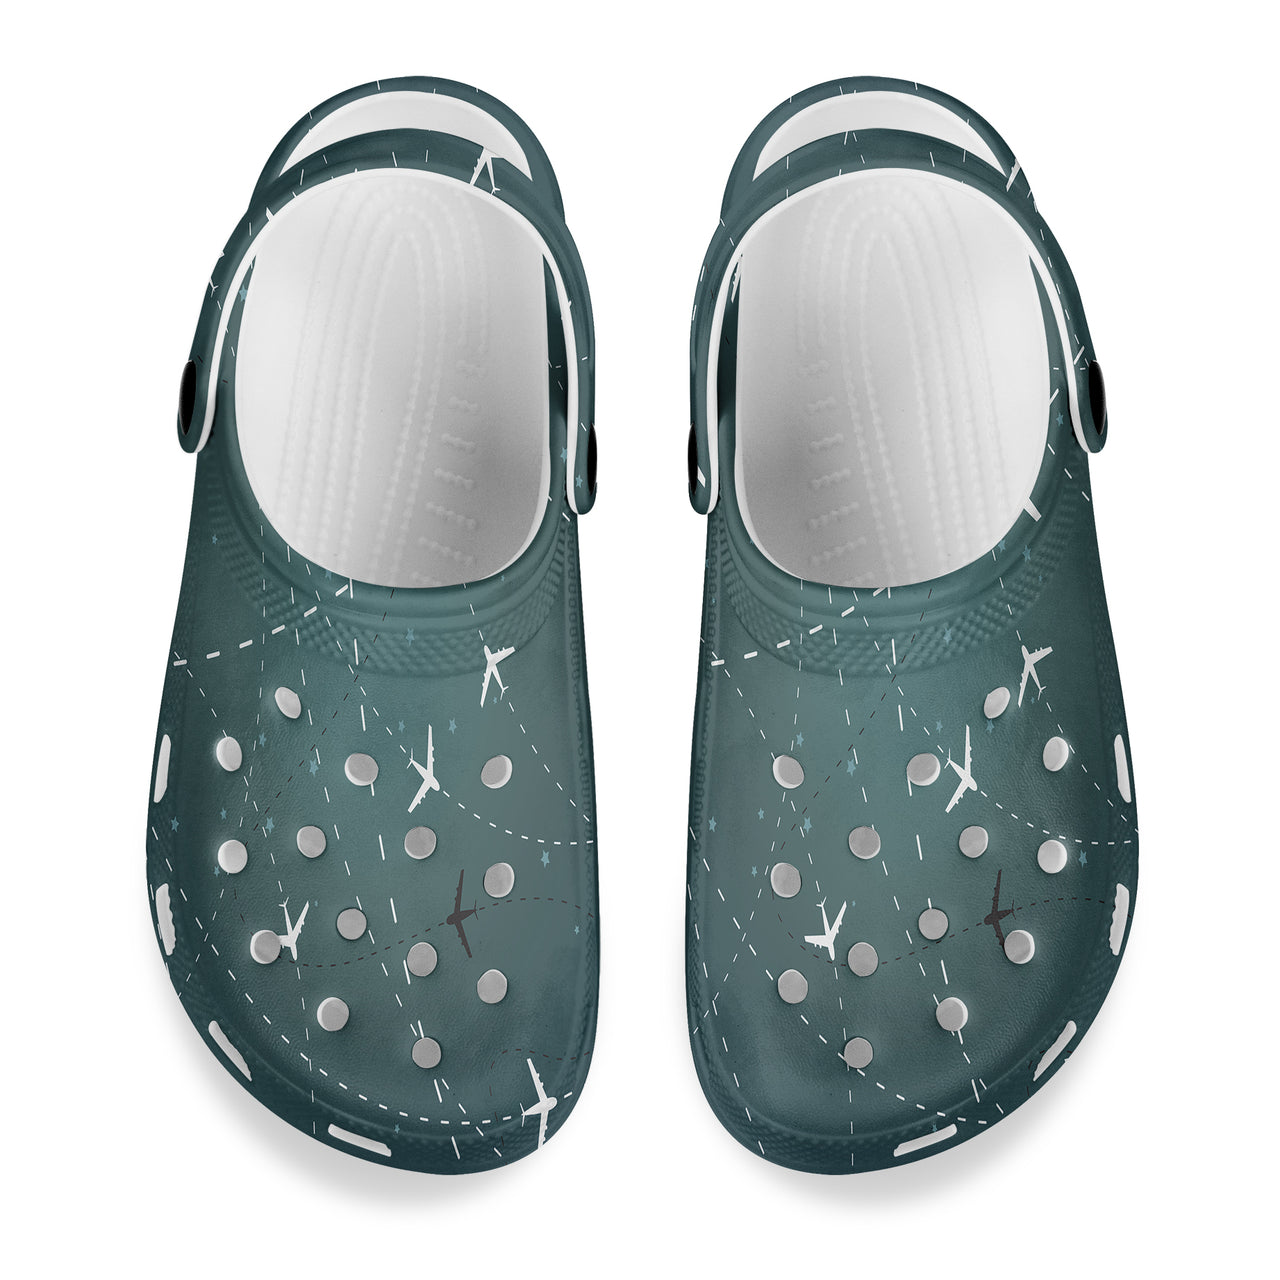 Travelling with Aircraft (Green) Designed Hole Shoes & Slippers (WOMEN)